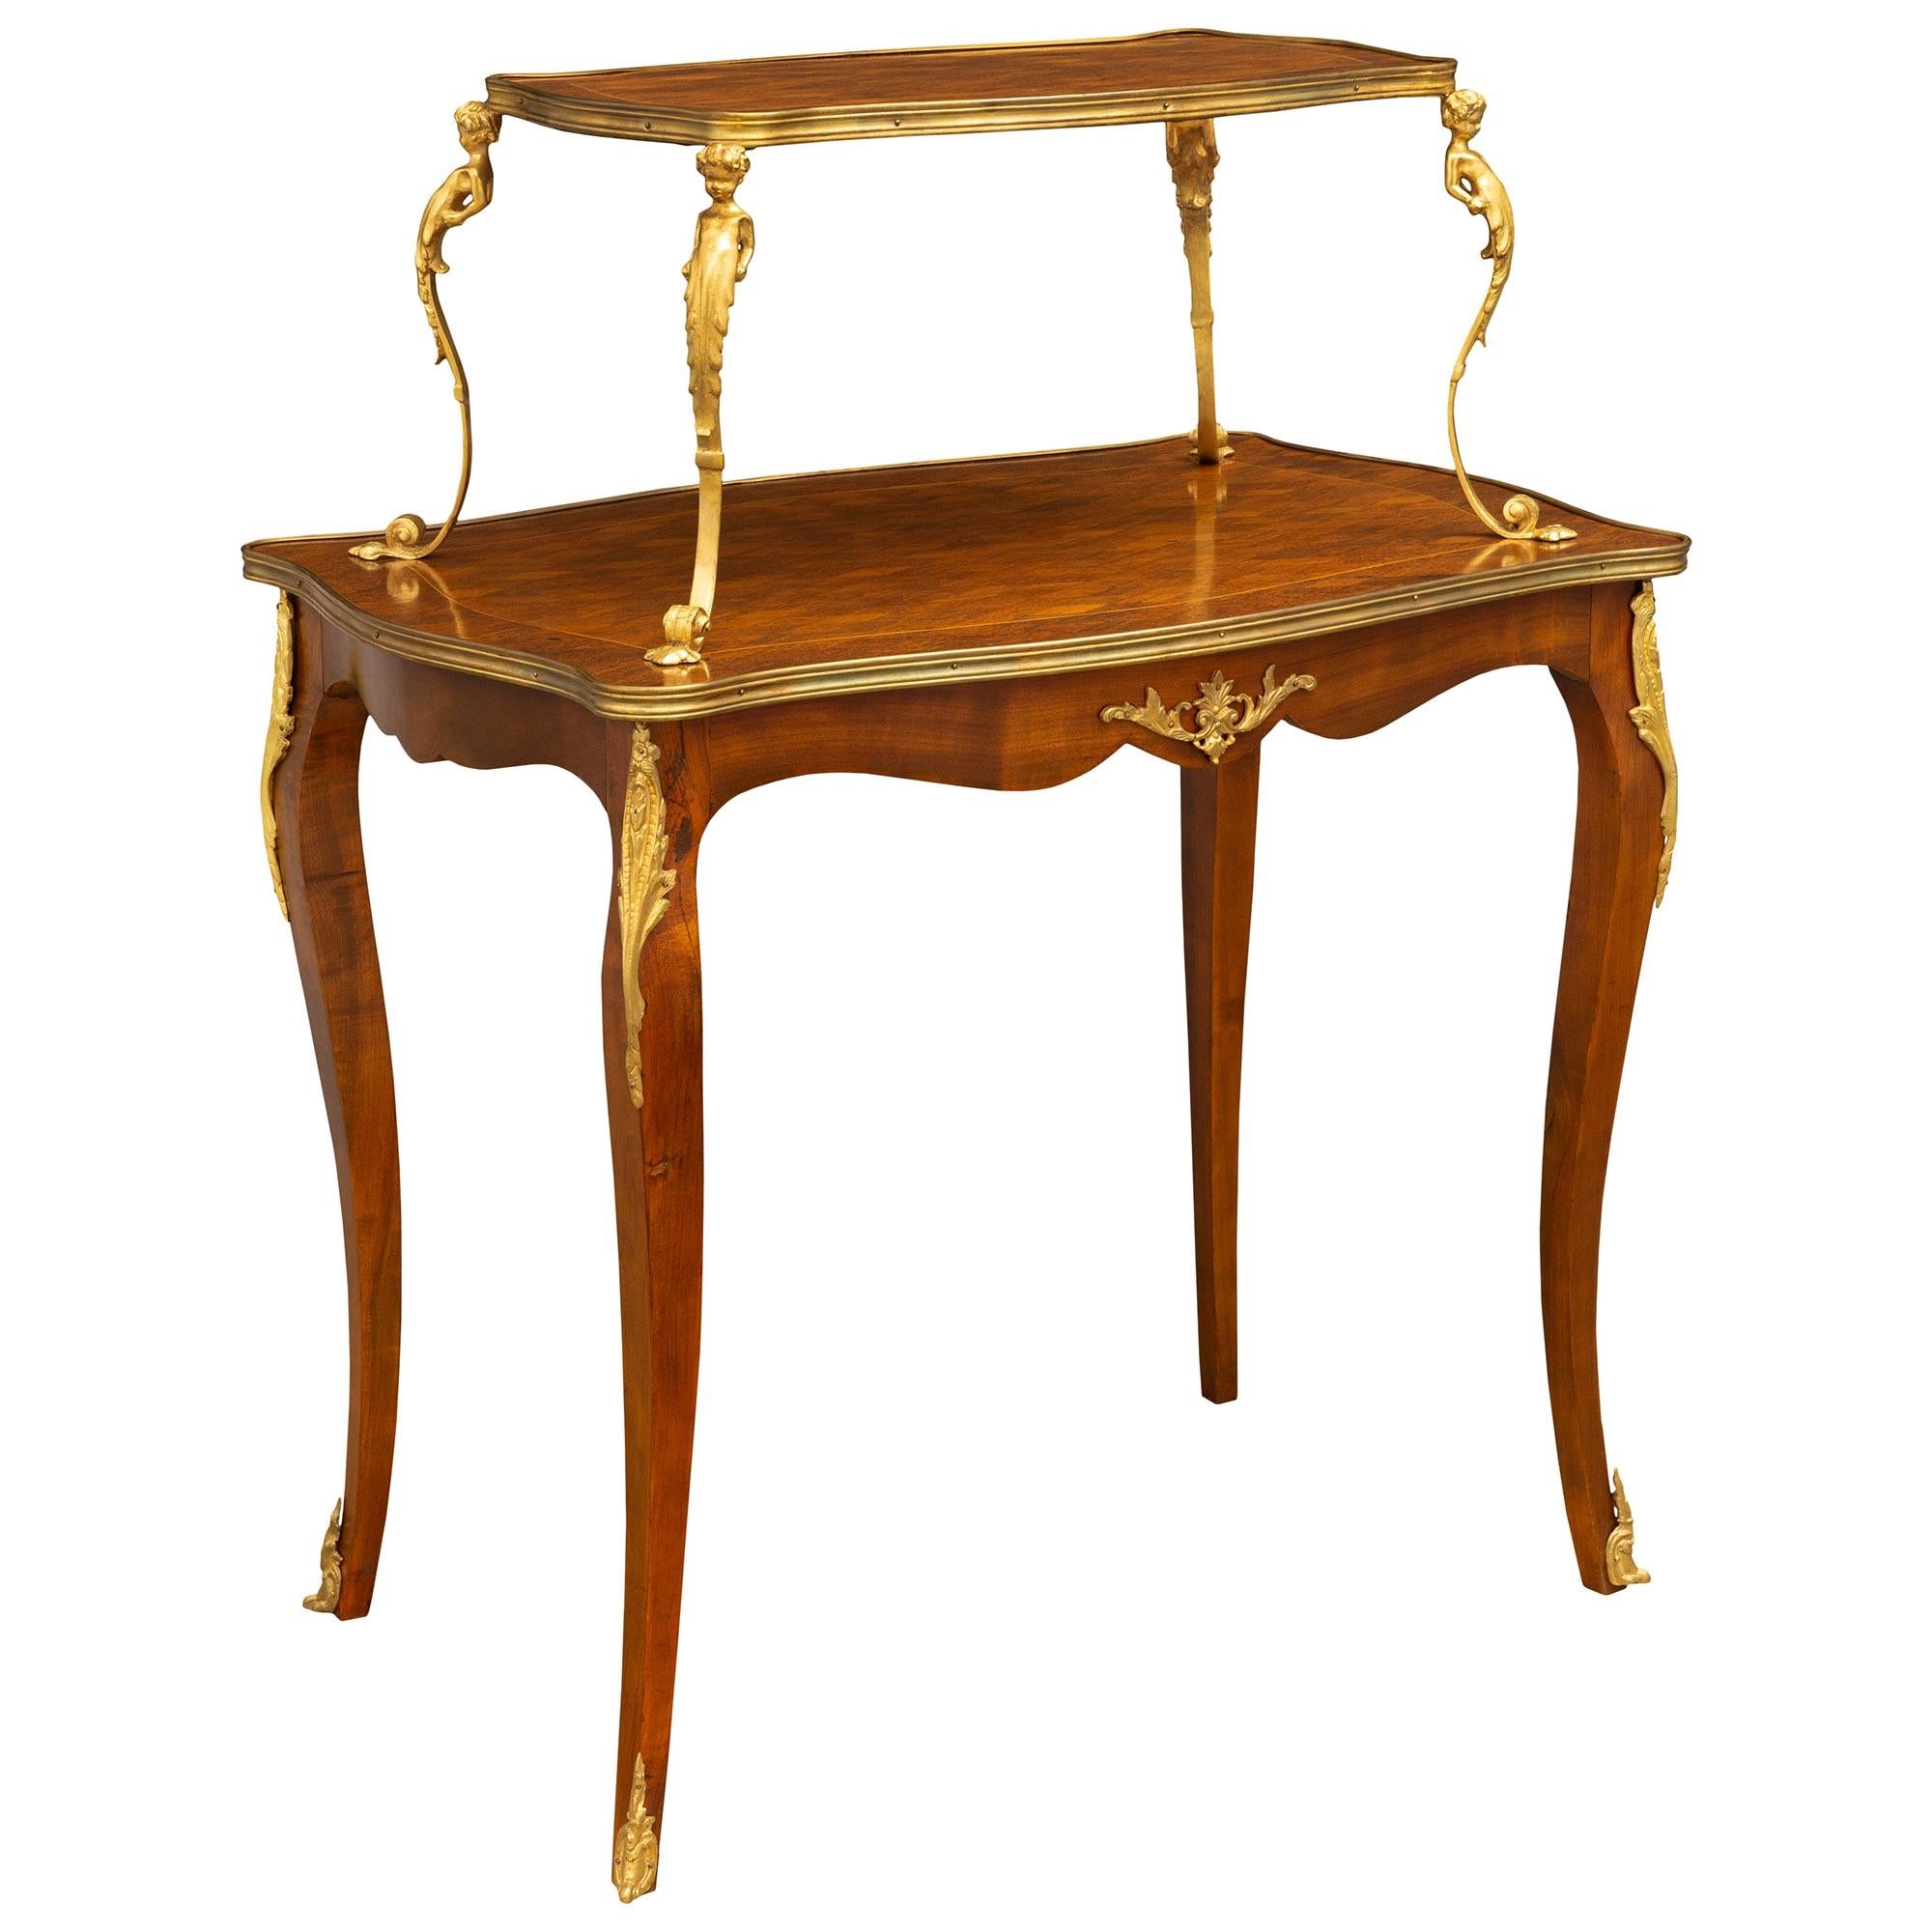 French 19th Century Louis XV Style Two-Tier Mahogany and Ormolu Serving Table In Good Condition For Sale In West Palm Beach, FL